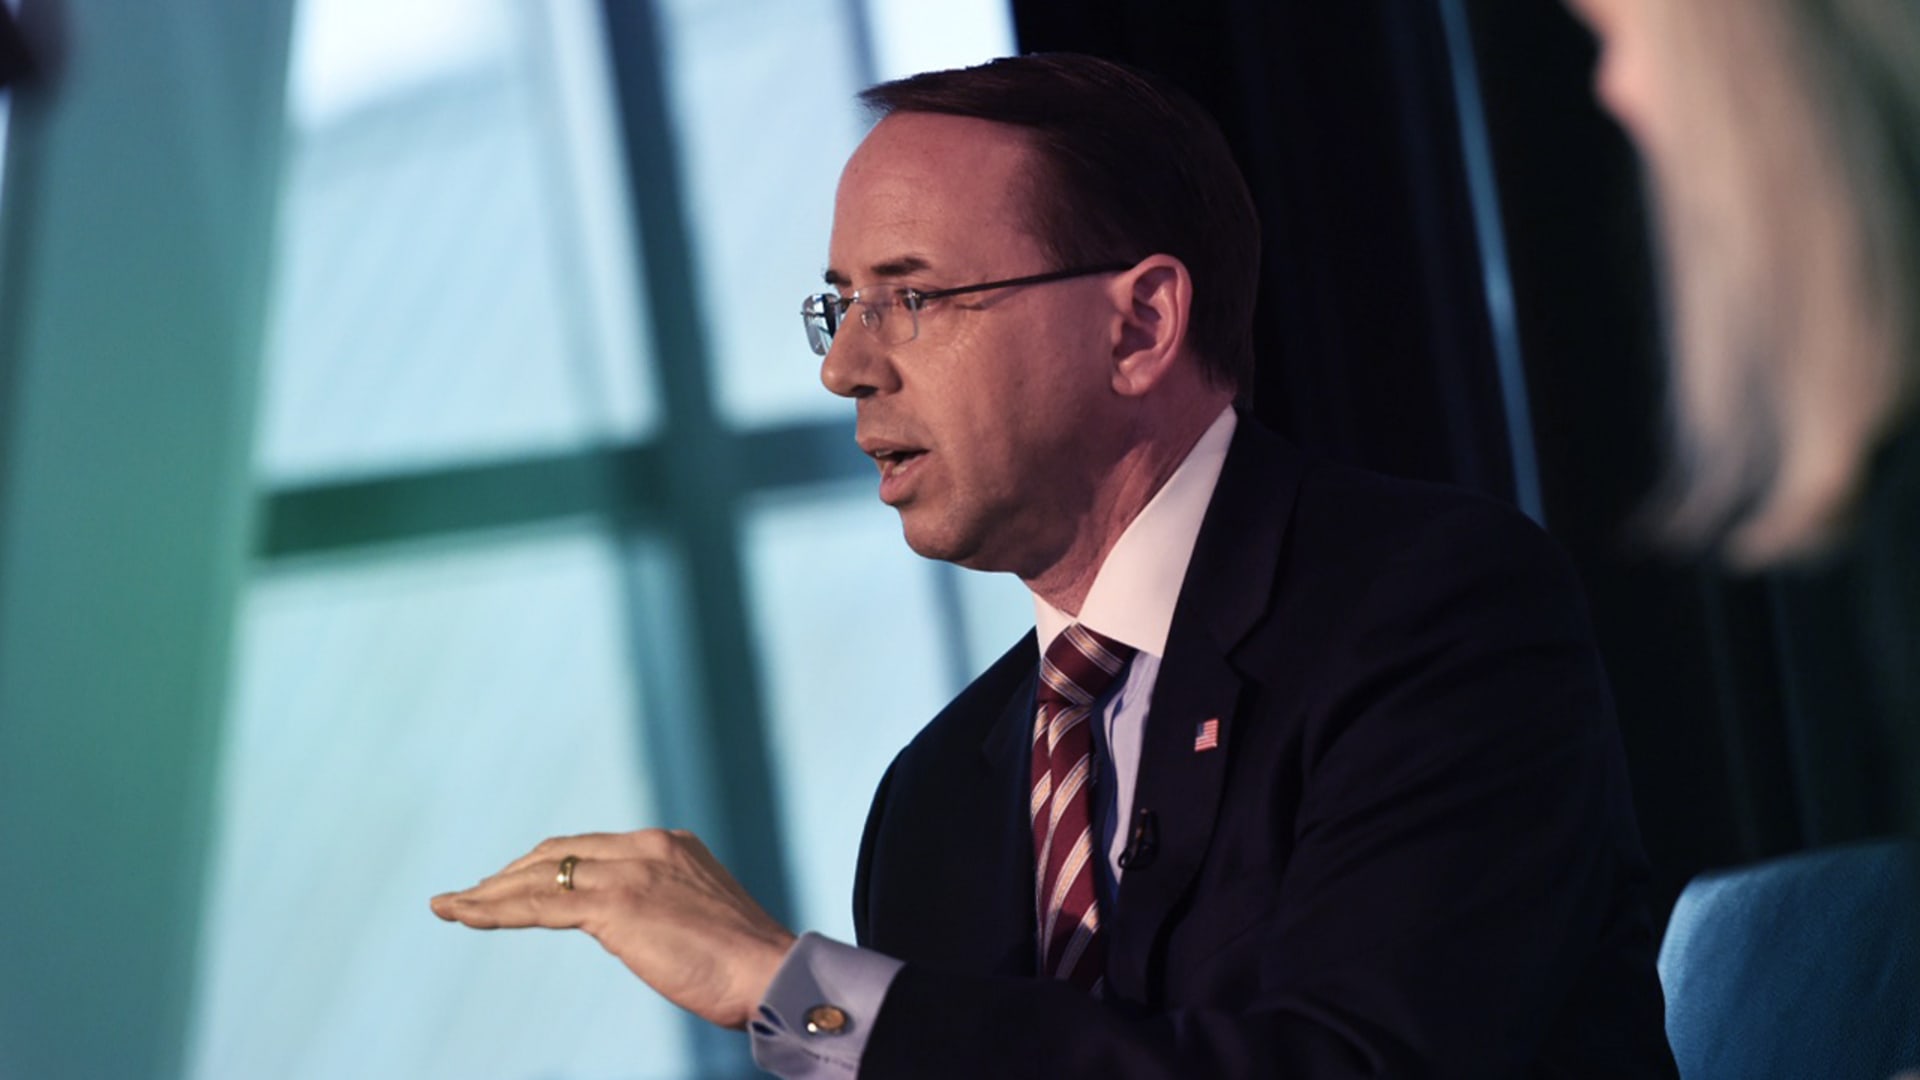 NYT: Rod Rosenstein proposed taping Trump, using 25th Amendment